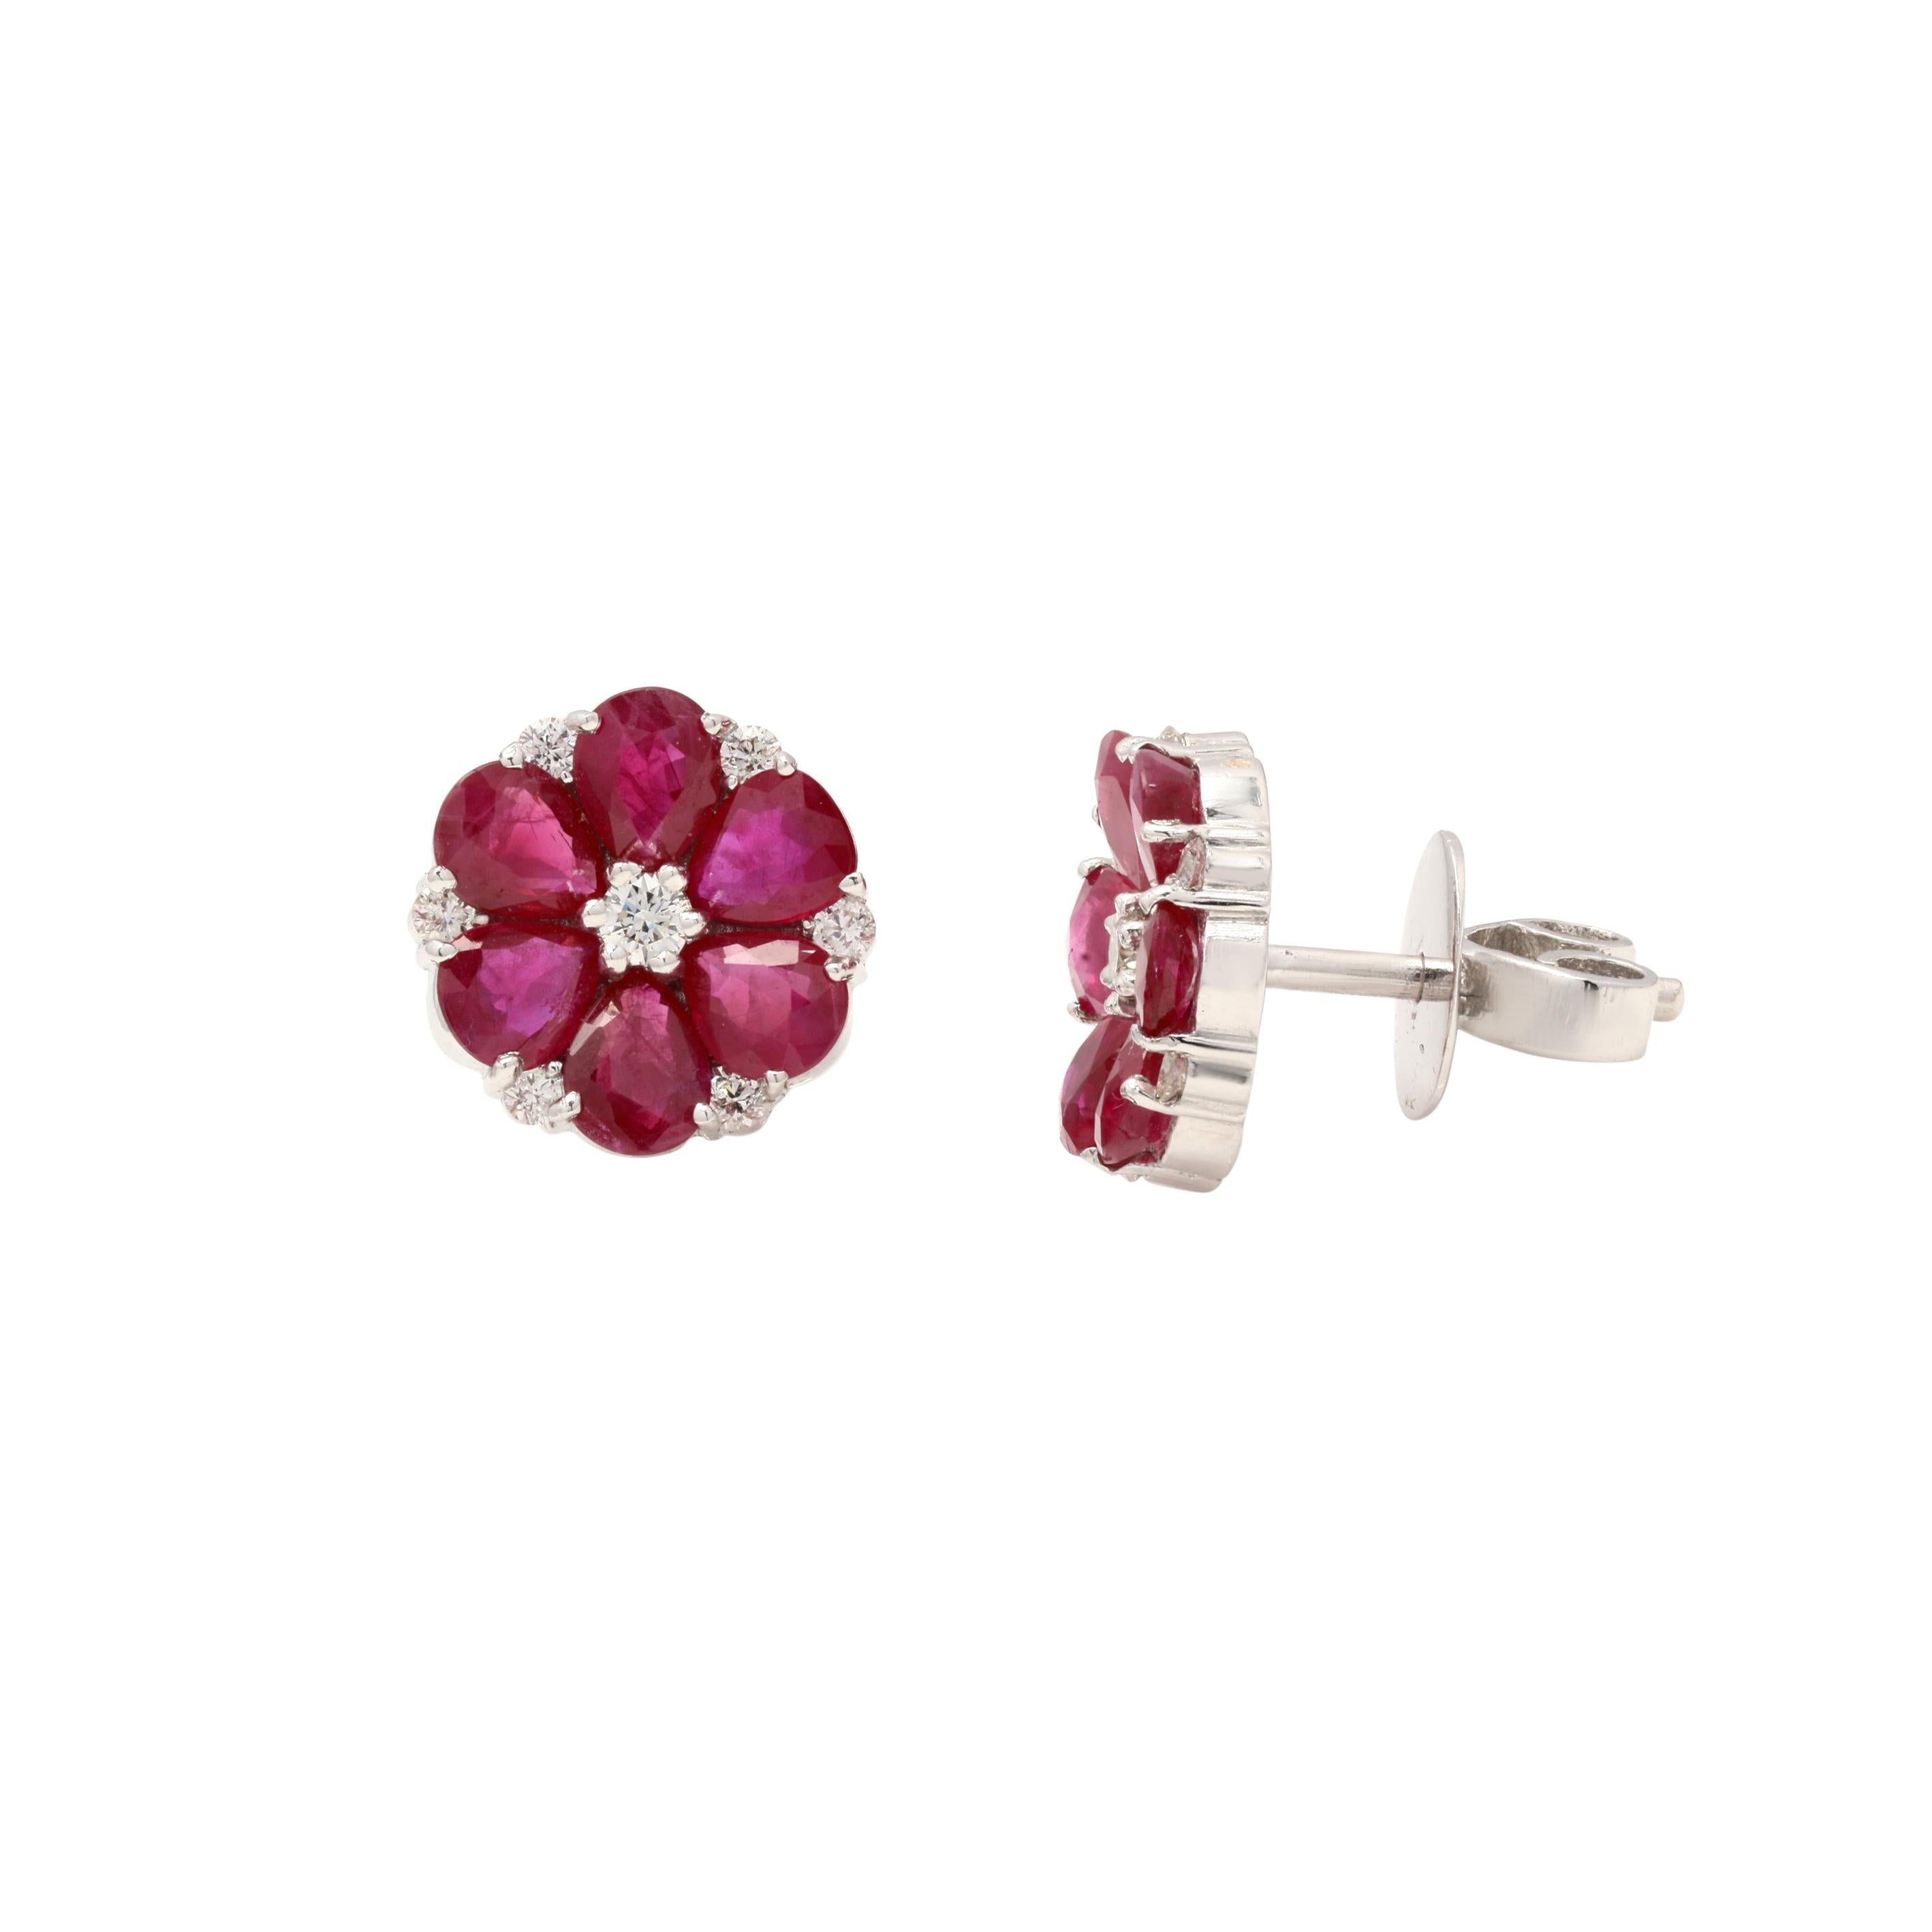 Pear Cut Ruby Flower Studs in 18K Gold with Diamonds. Embrace your look with these stunning pair of earrings suitable for any occasion to complete your outfit.
Studs create a subtle beauty while showcasing the colors of the natural precious